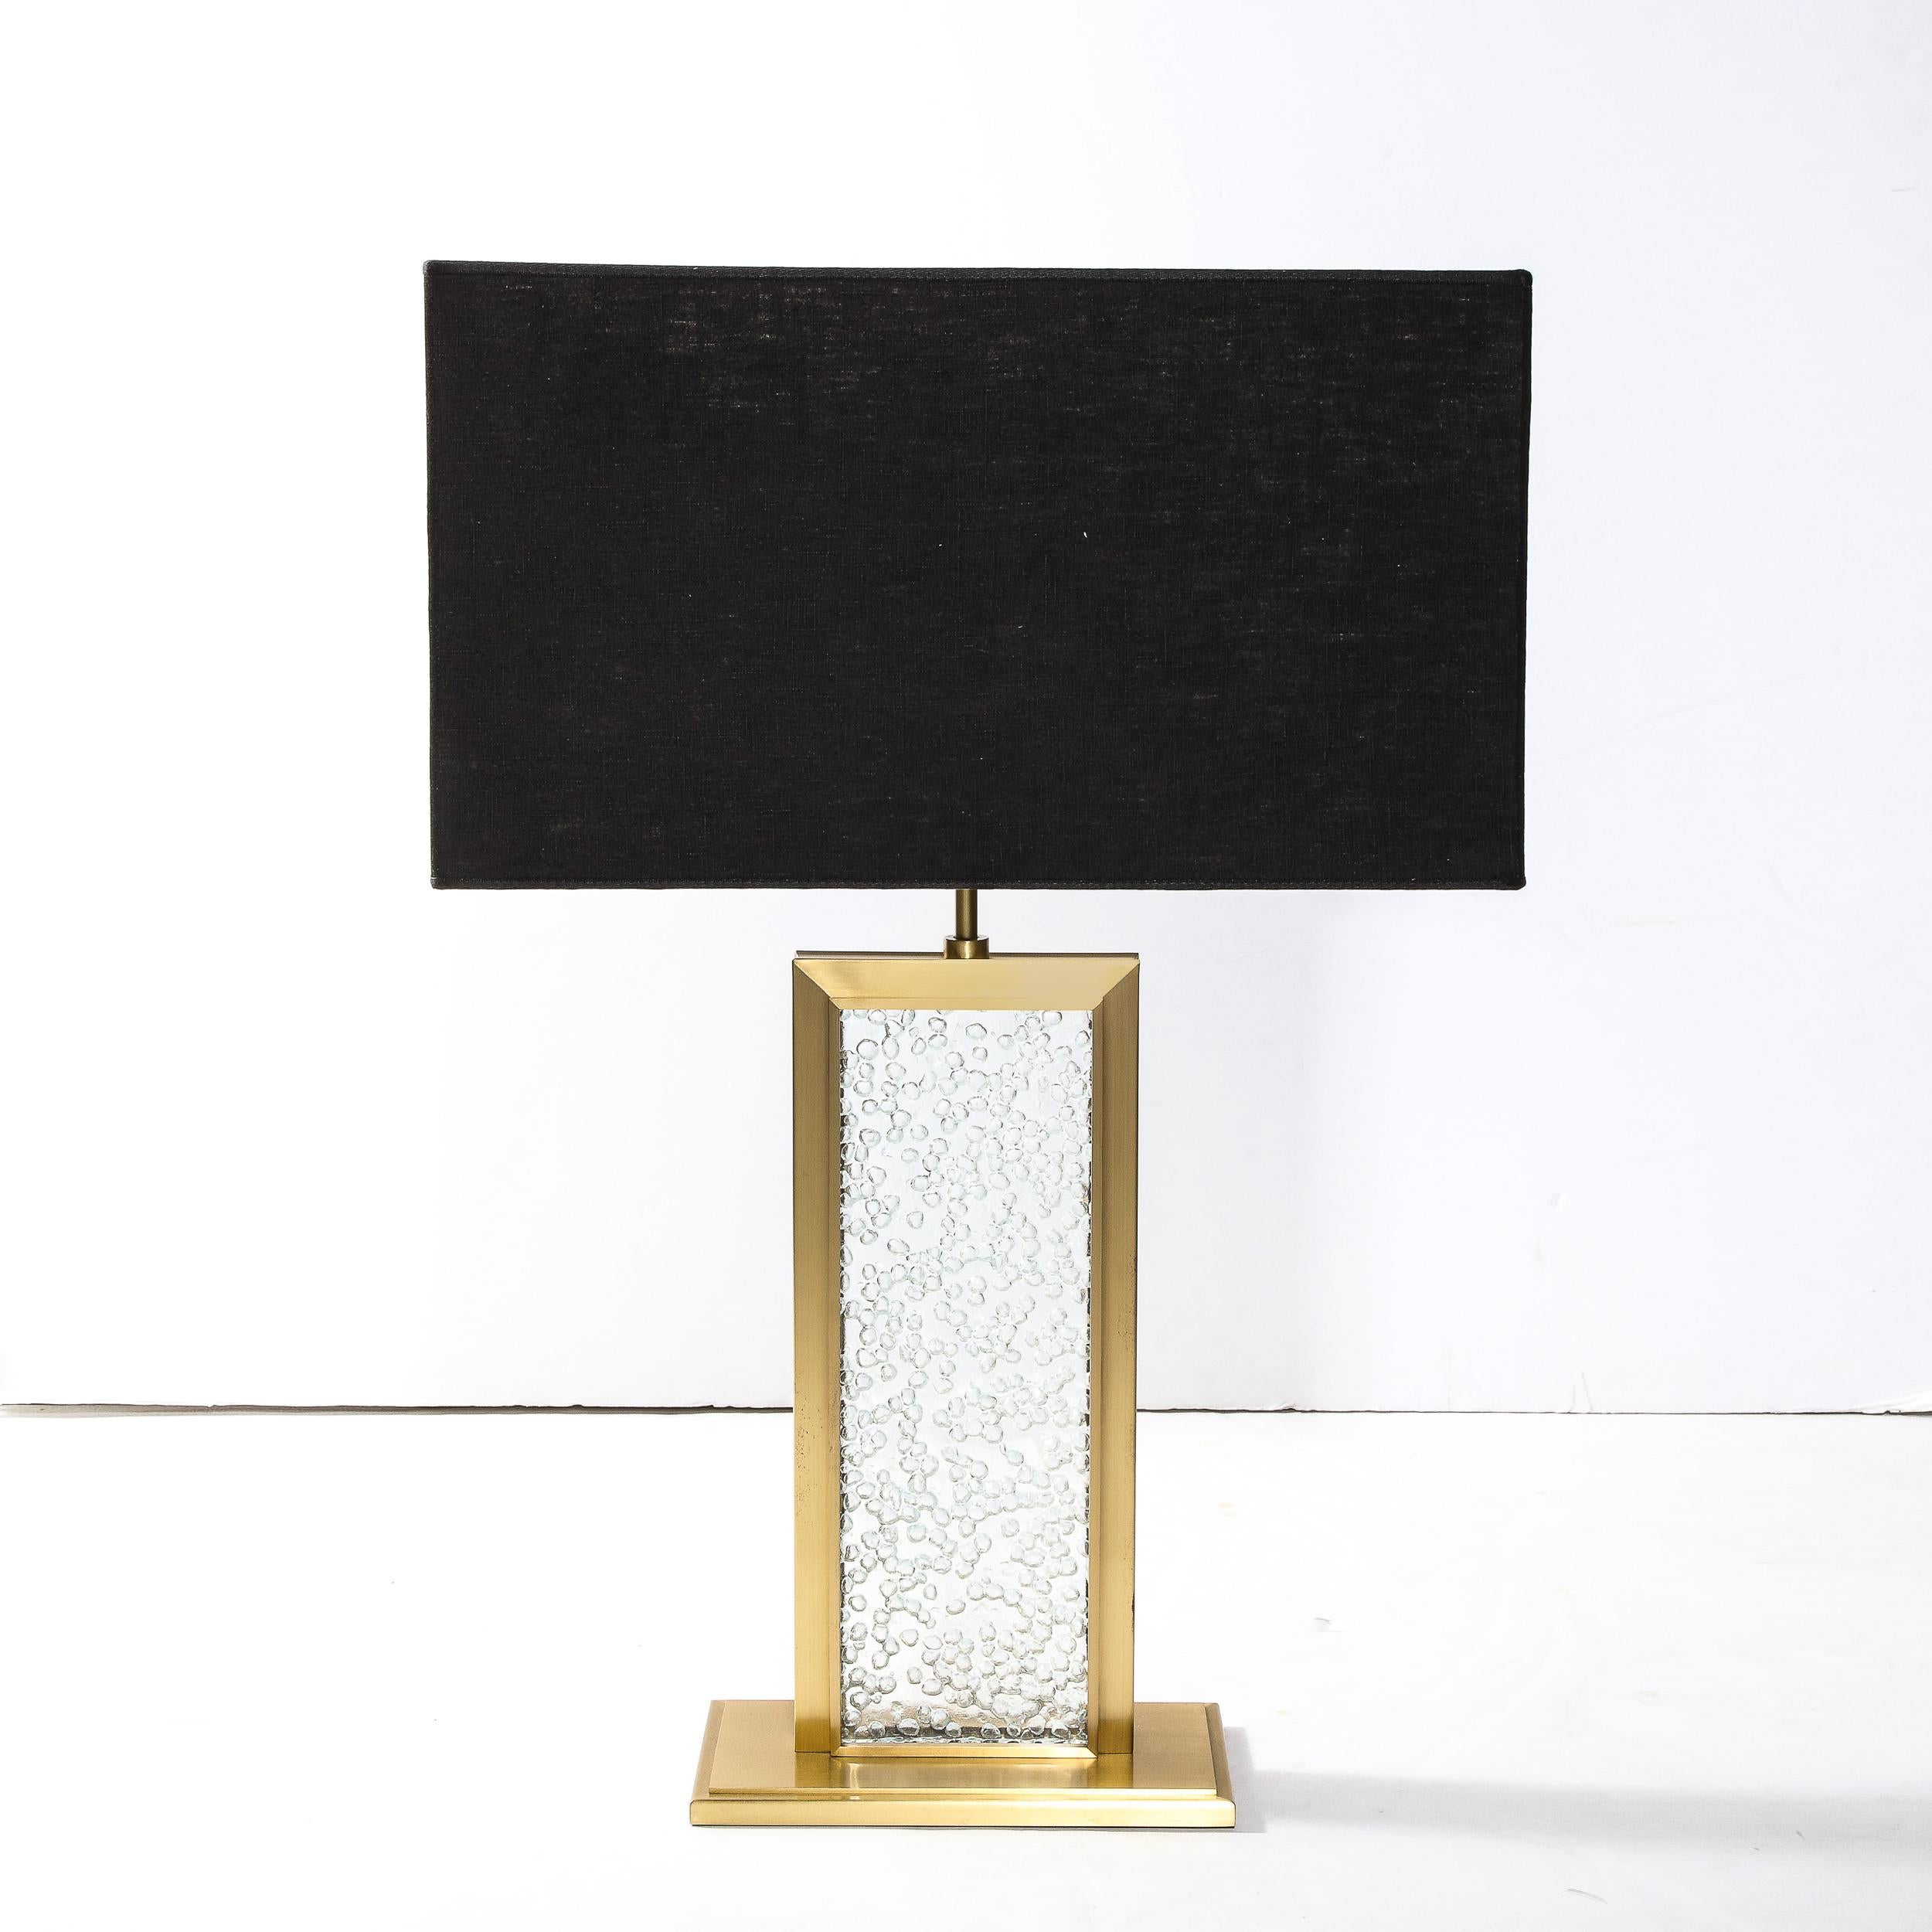 This stunning and dramatic modernist table lamp was realized in Murano, Italy- the island off the coast of Venice renowned for centuries for its superlative glass production- during the latter half of the 20th century. It features a rectangular base